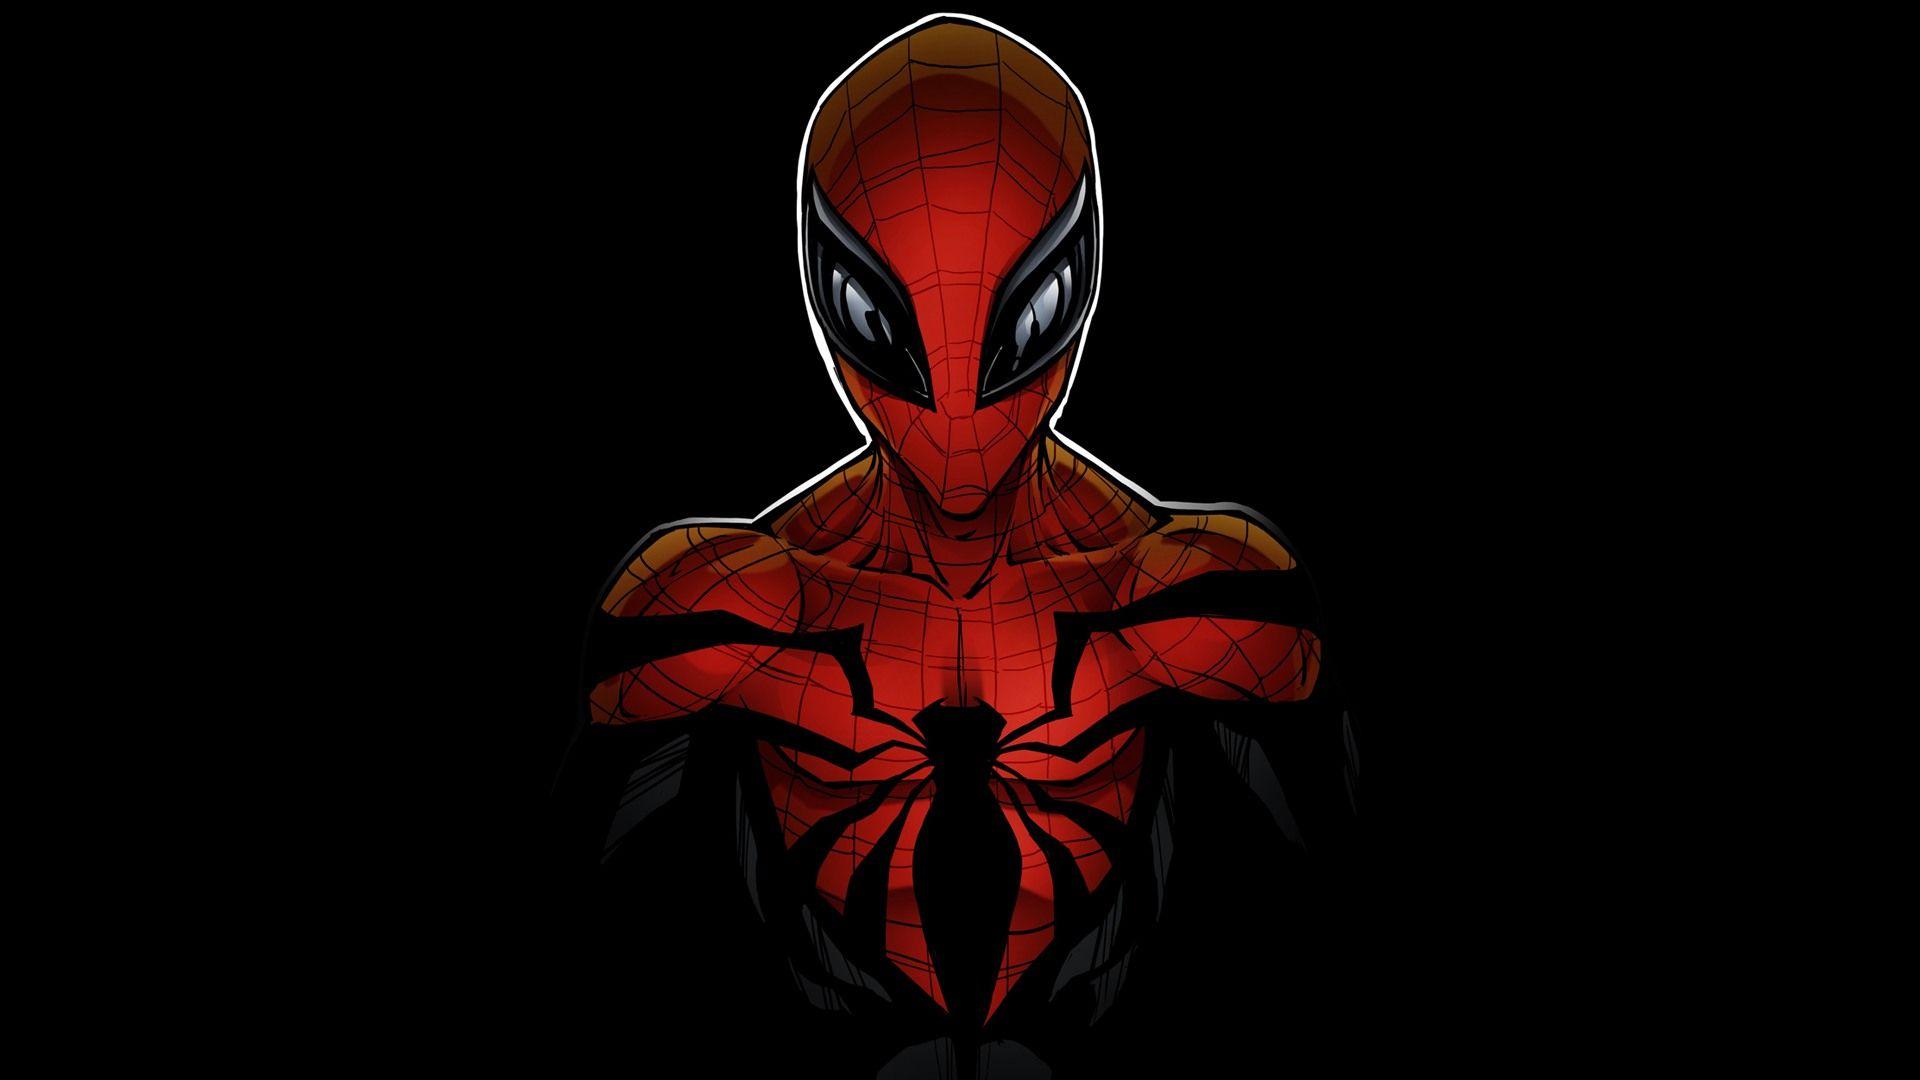 Spiderman Full HD Wallpaper and Background Imagex1080